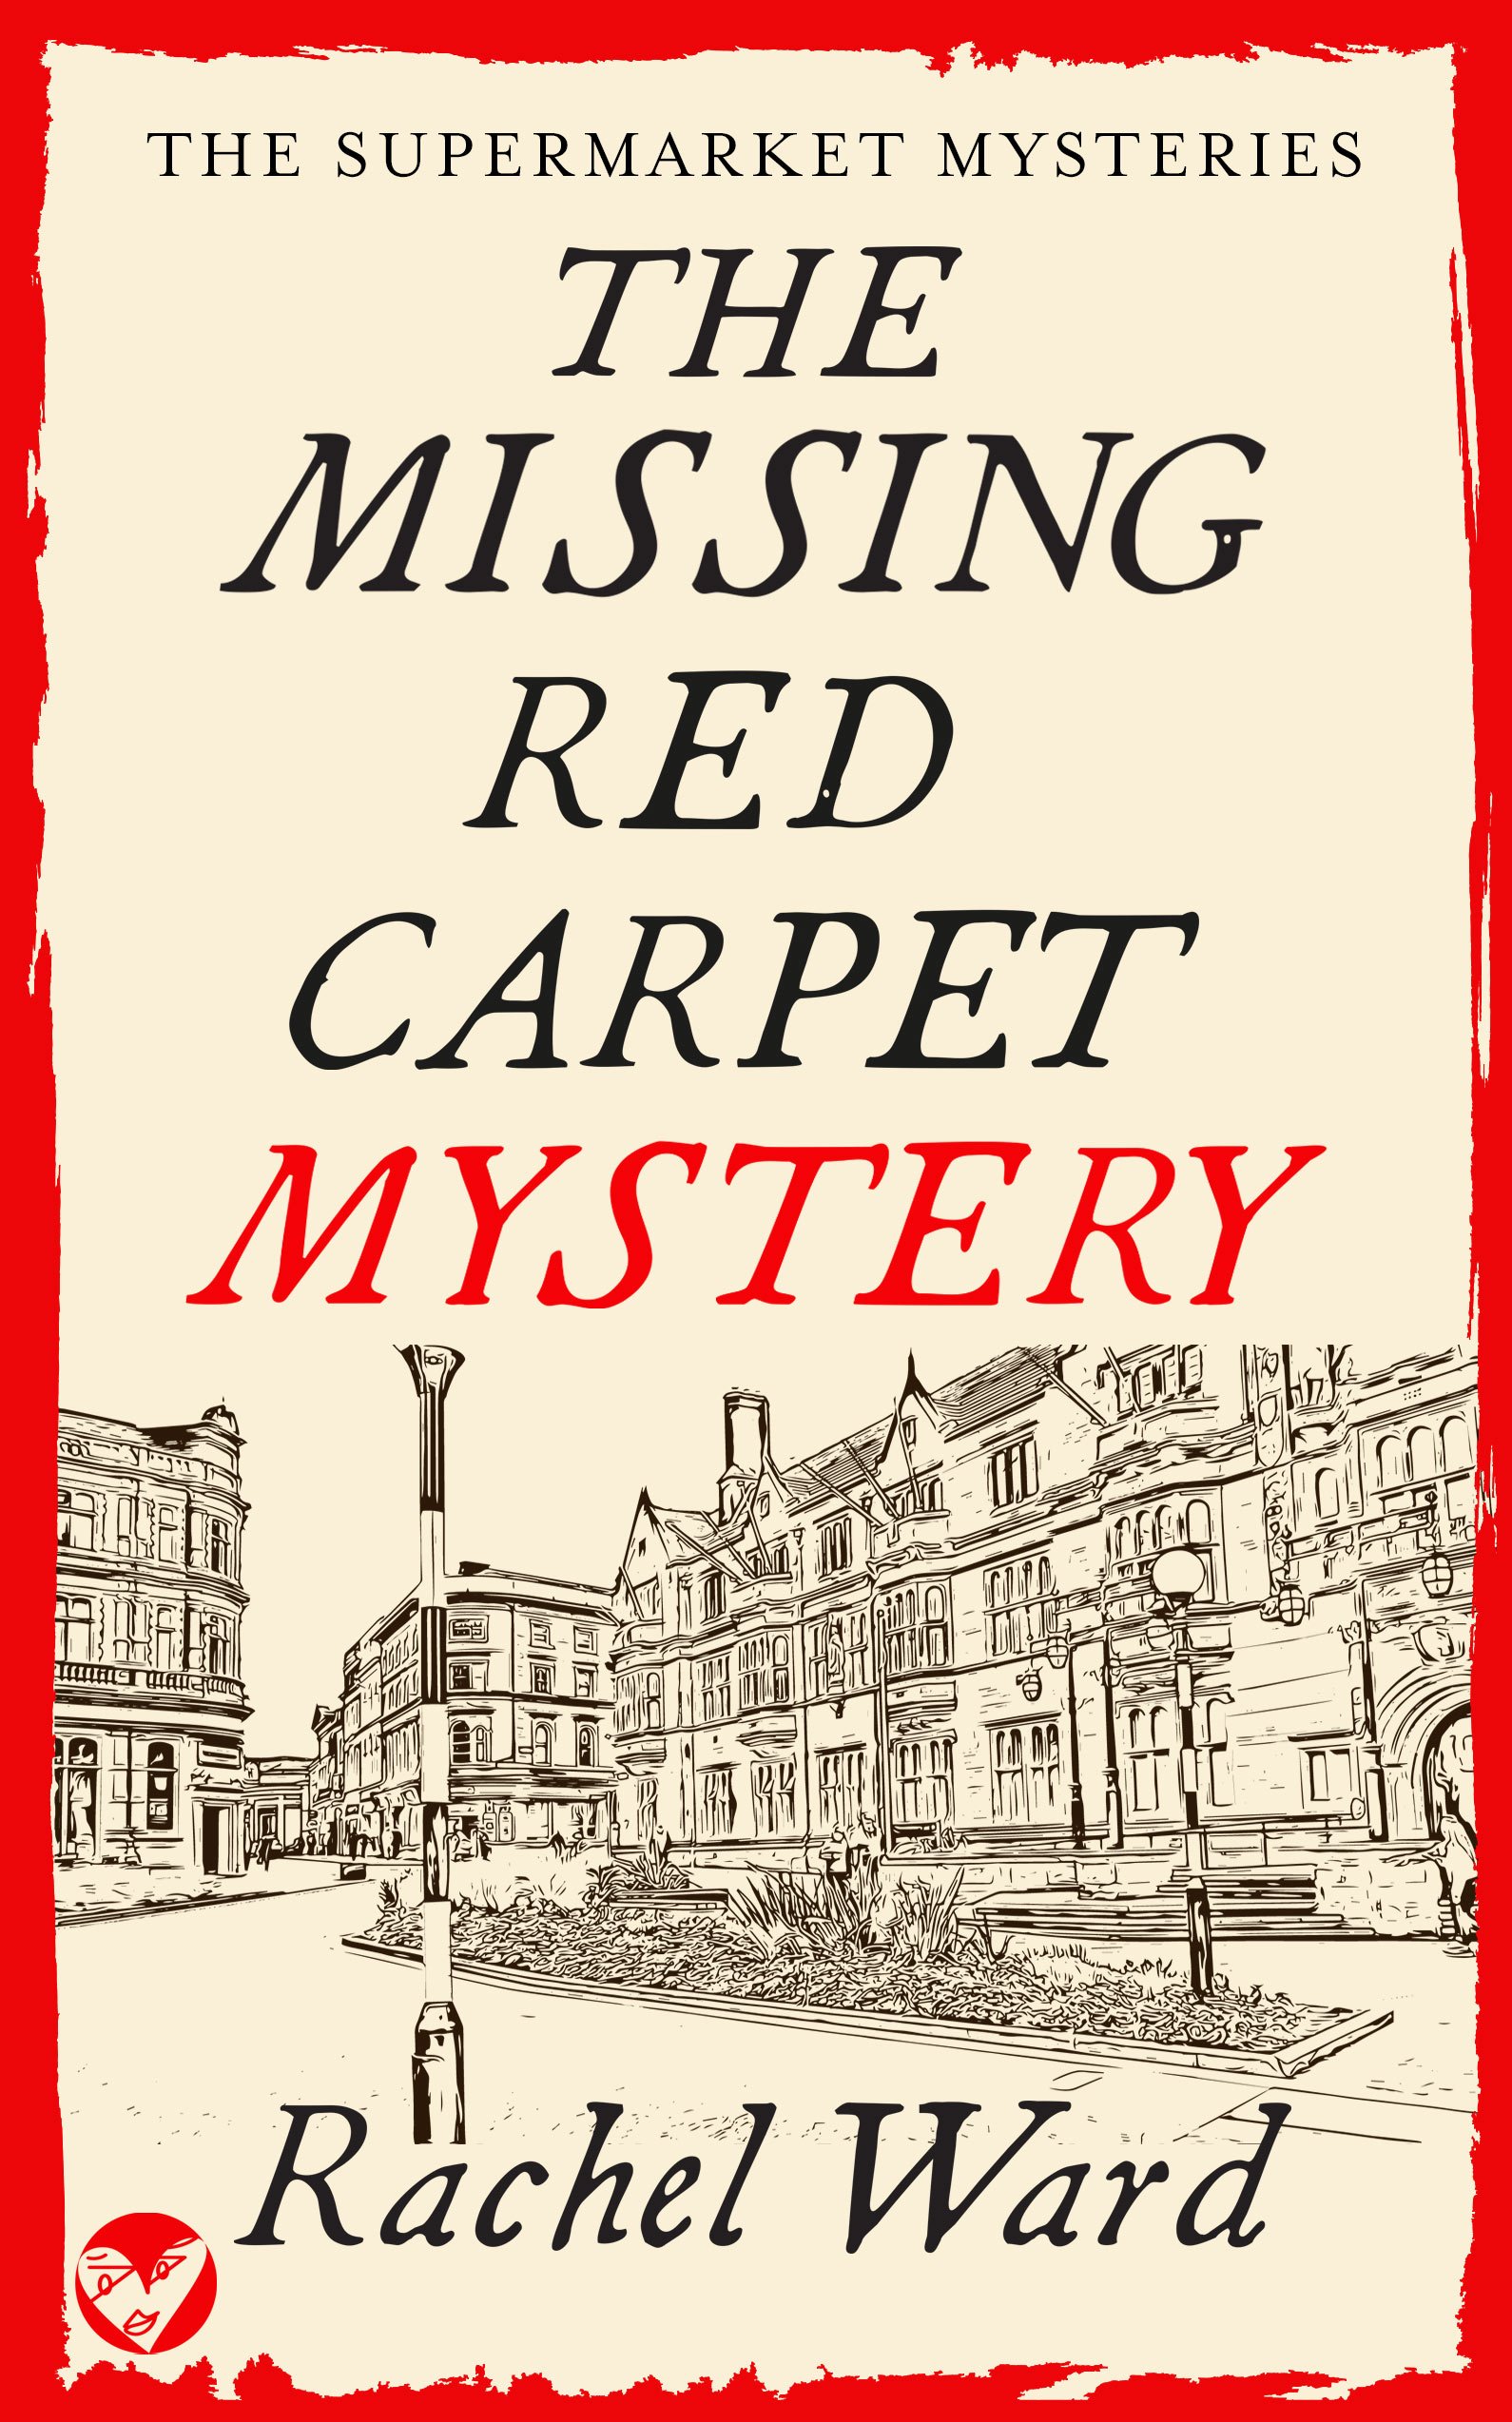 THE MISSING RED CARPET MYSTERY Cover publish 631KB.jpg